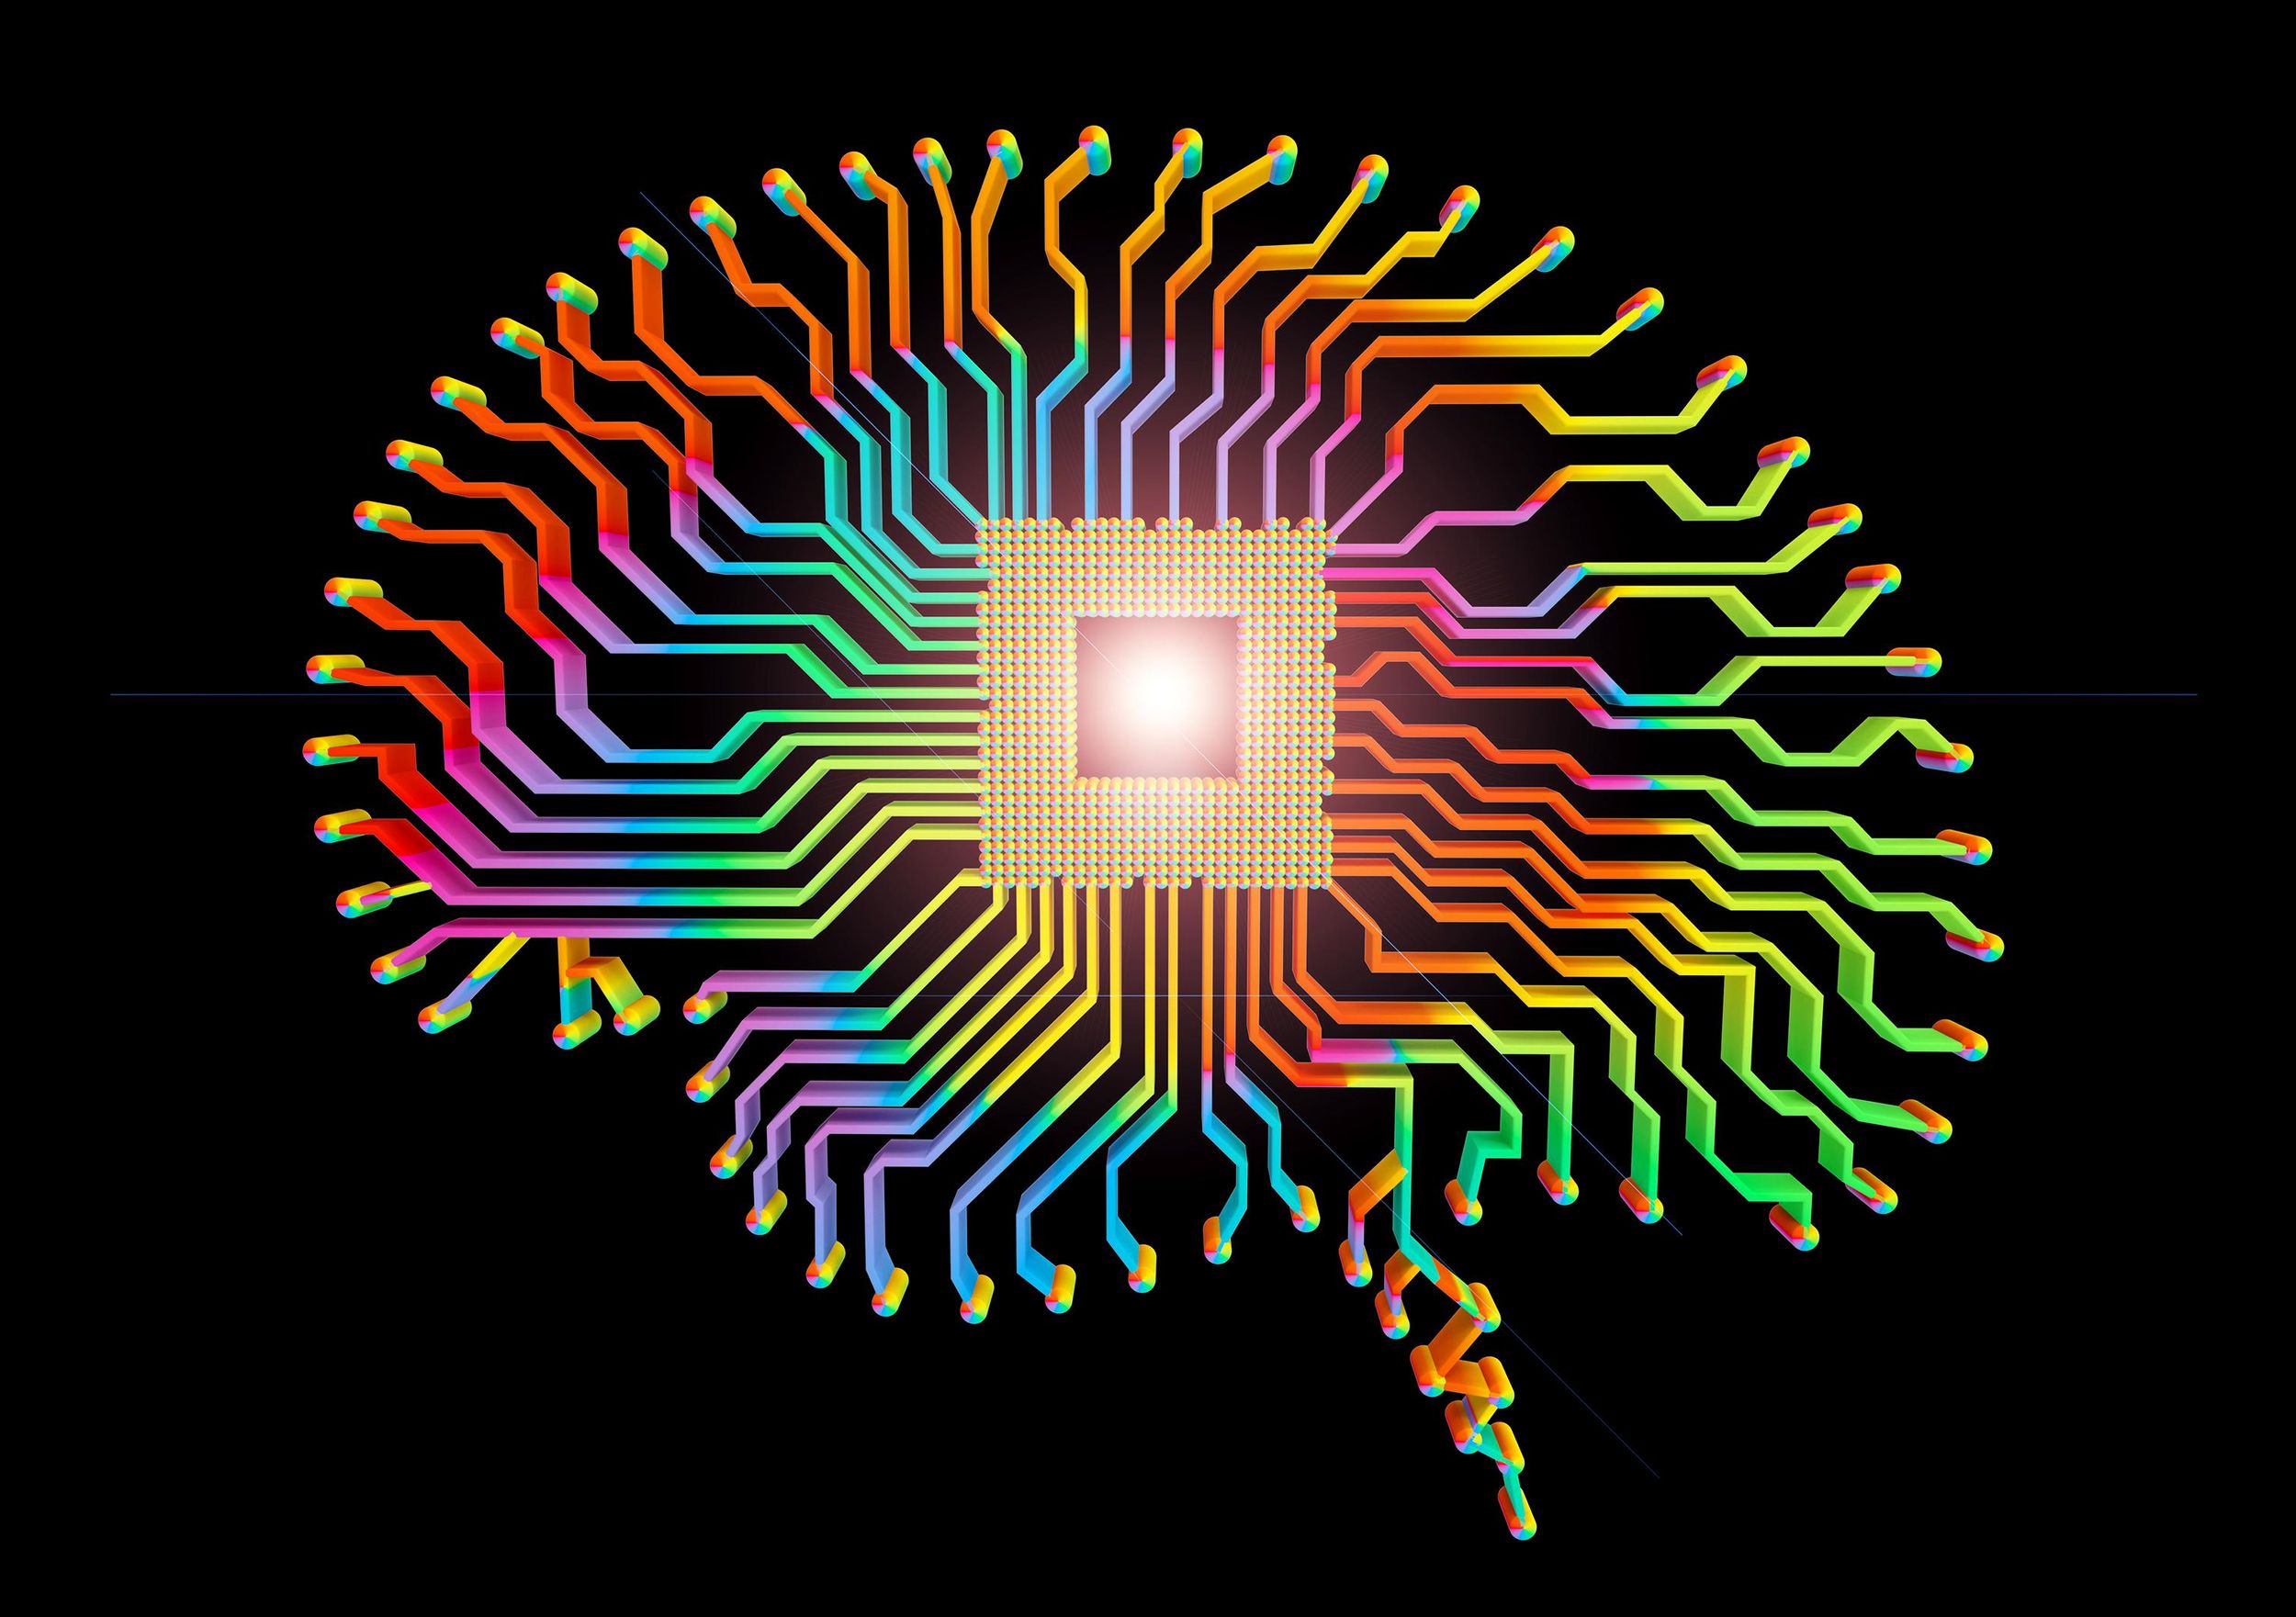 A glowing chip sits in the middle of a colorfully rendered illustration of a brain made of connecting lines.